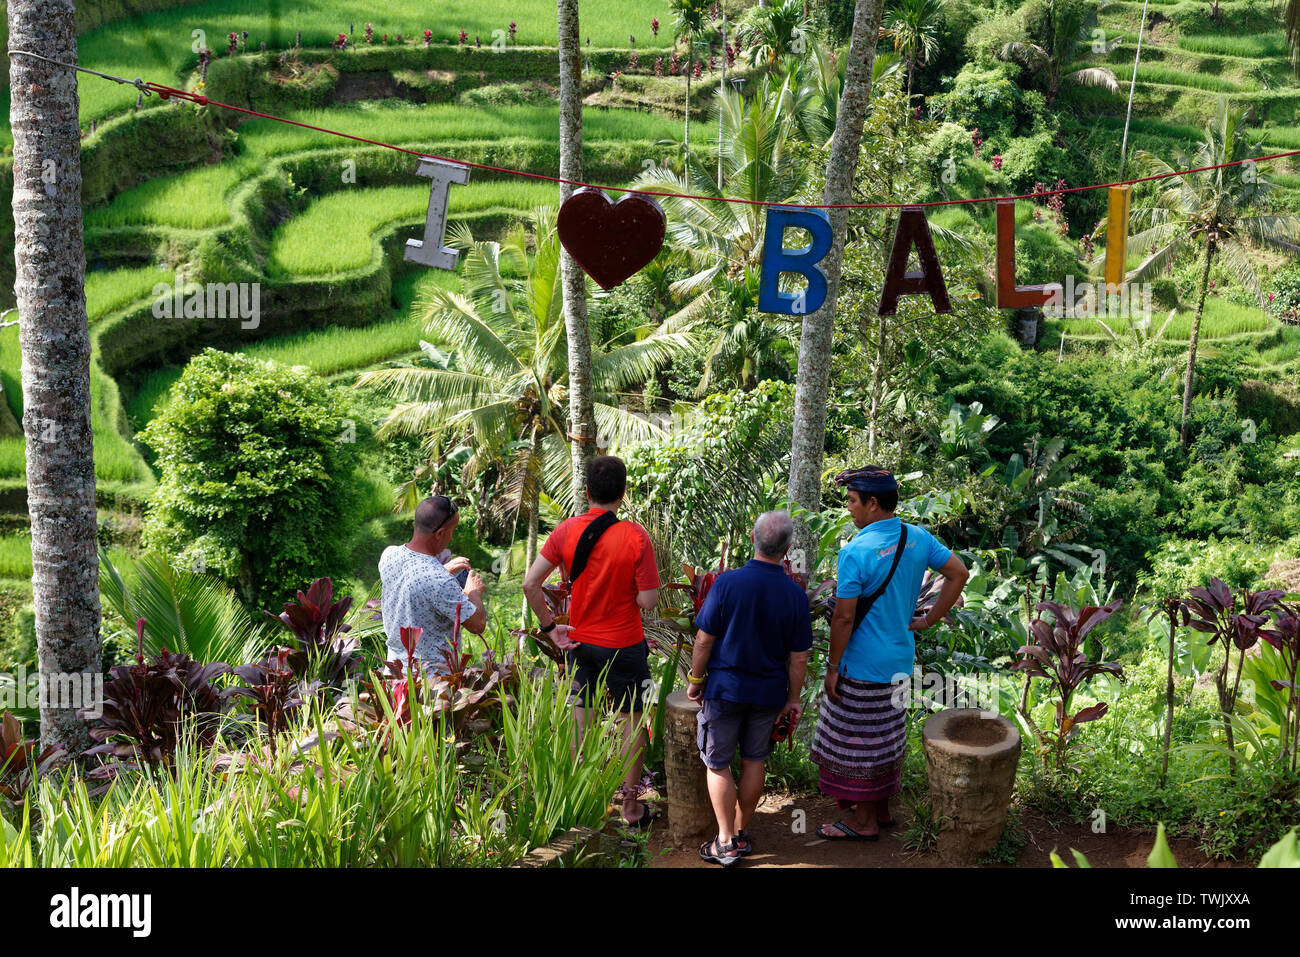 Tourists at a planned photospot with 'I Love Bali' sign, Tegallalang Rice Terraces, Ubud, Bali, Indonesia Stock Photo